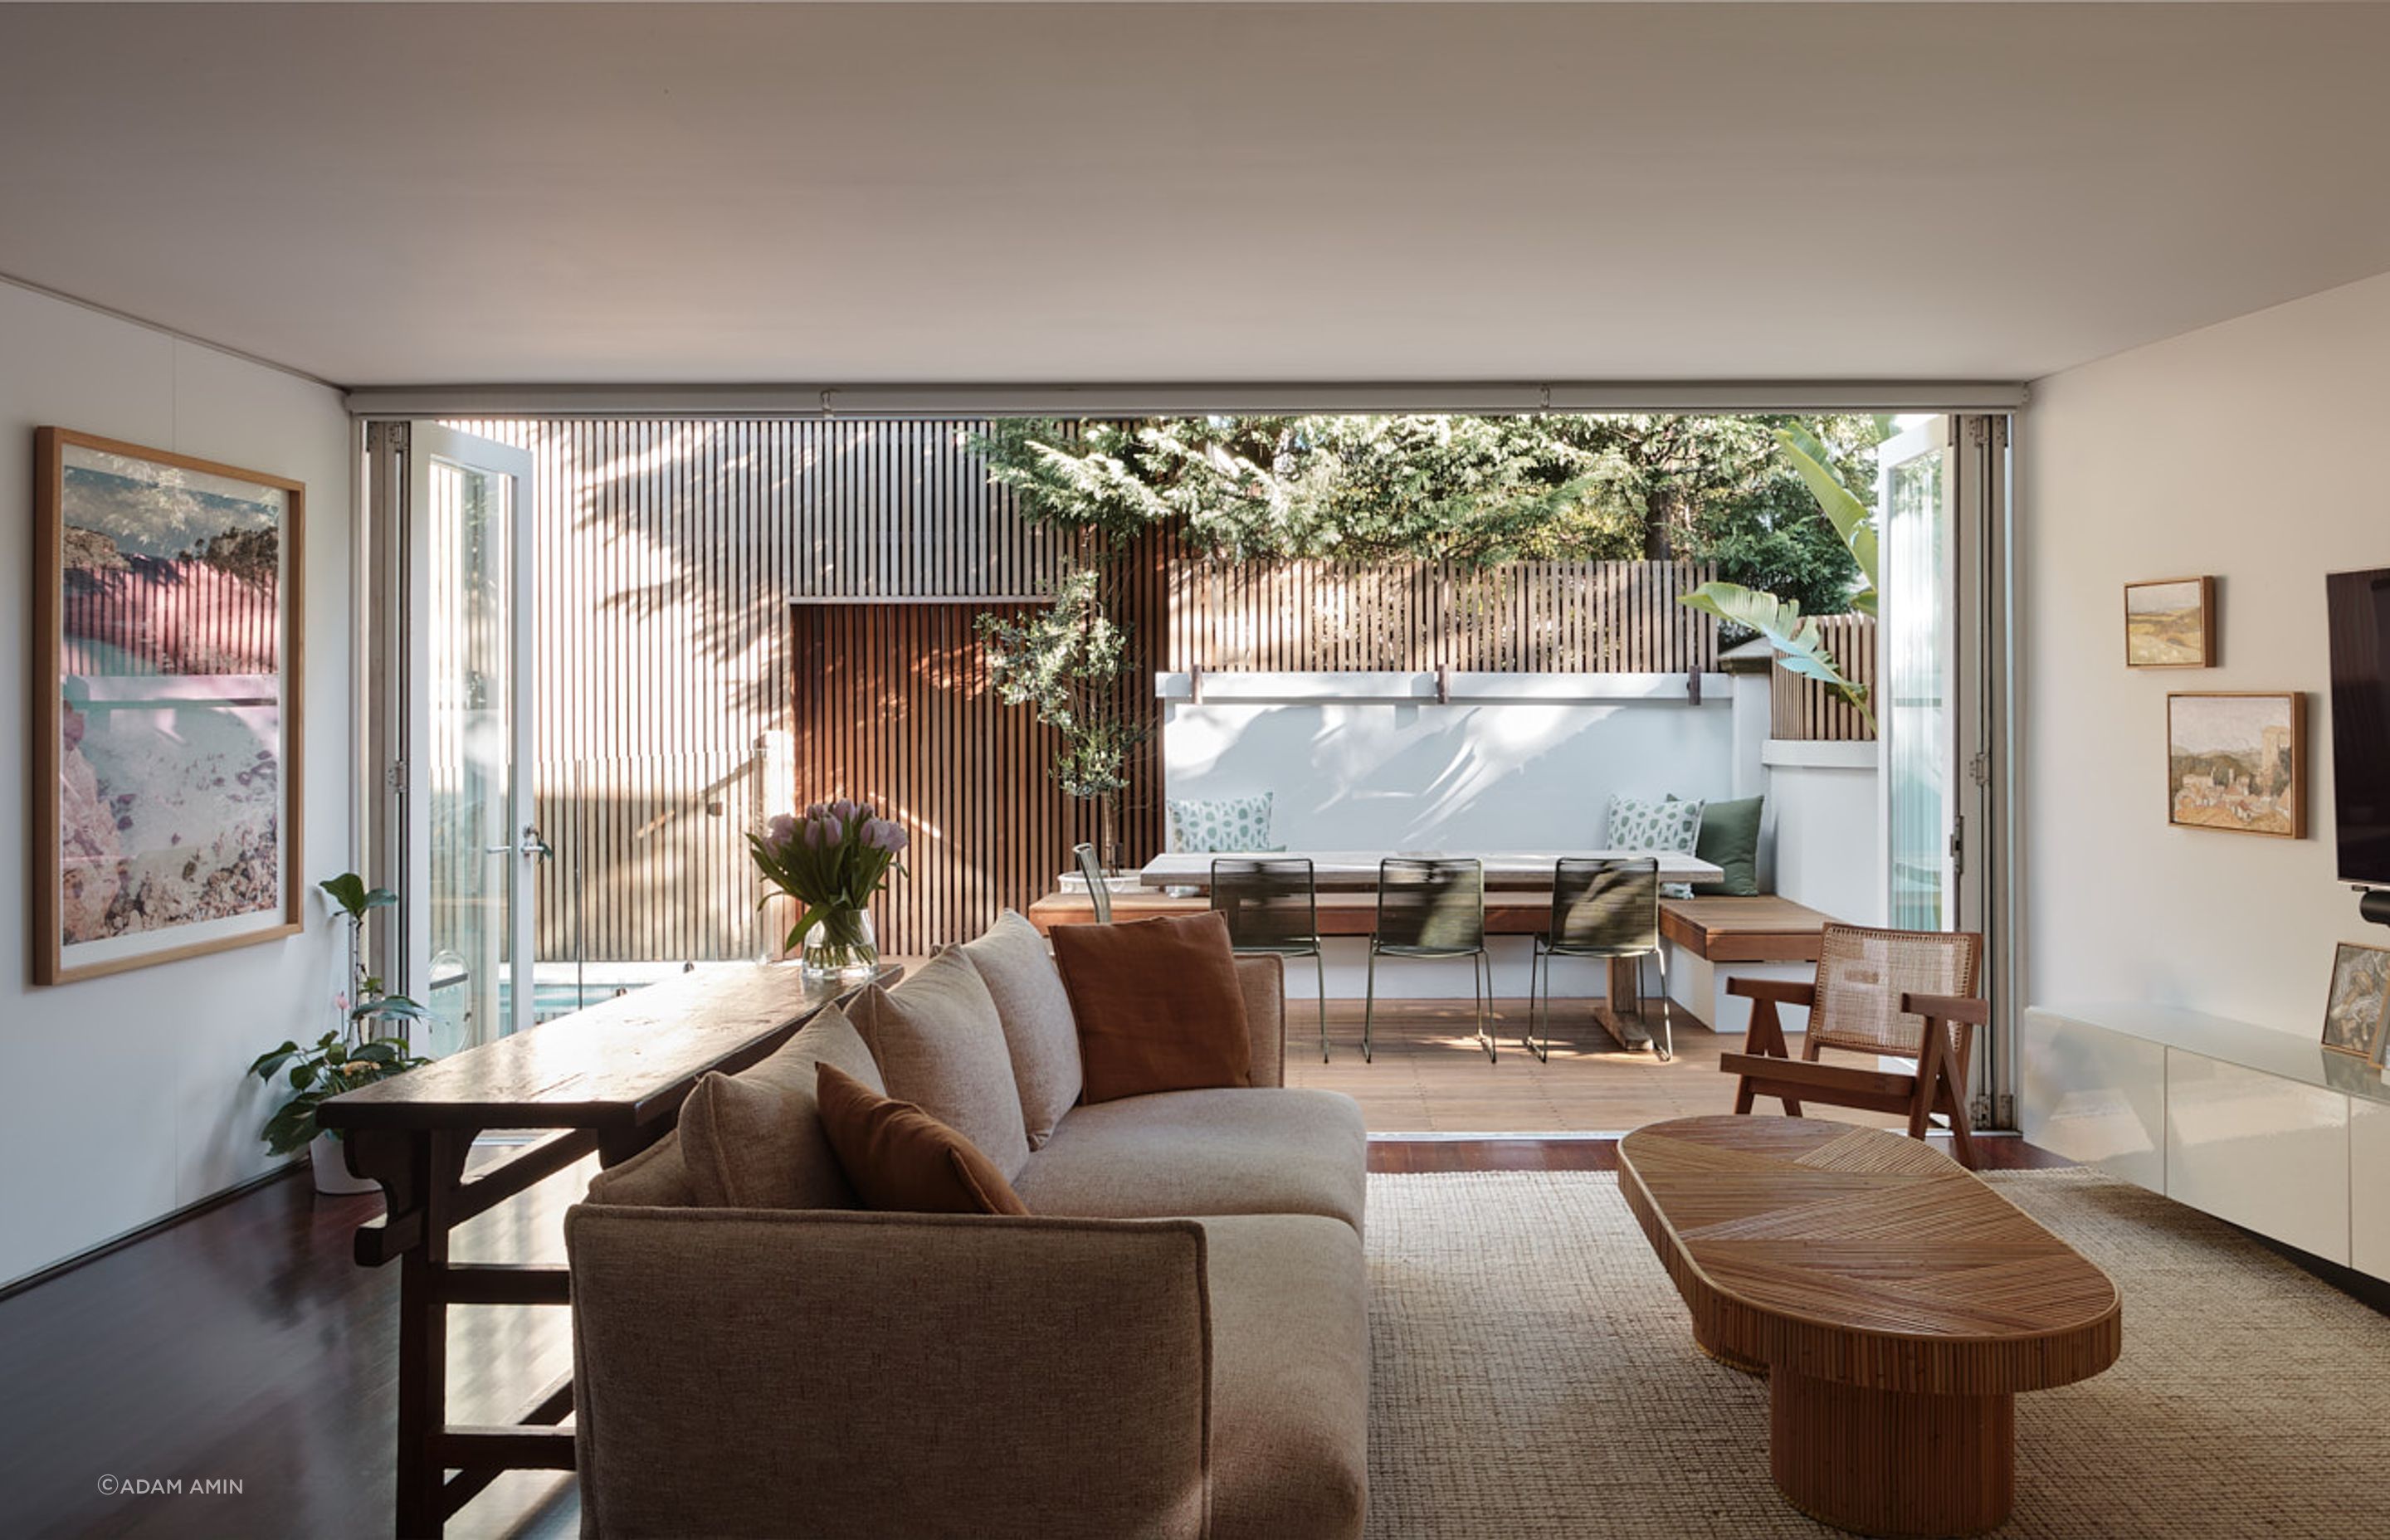 The indoor living space is connected to the outdoor entertaining space via double bi-fold doors.